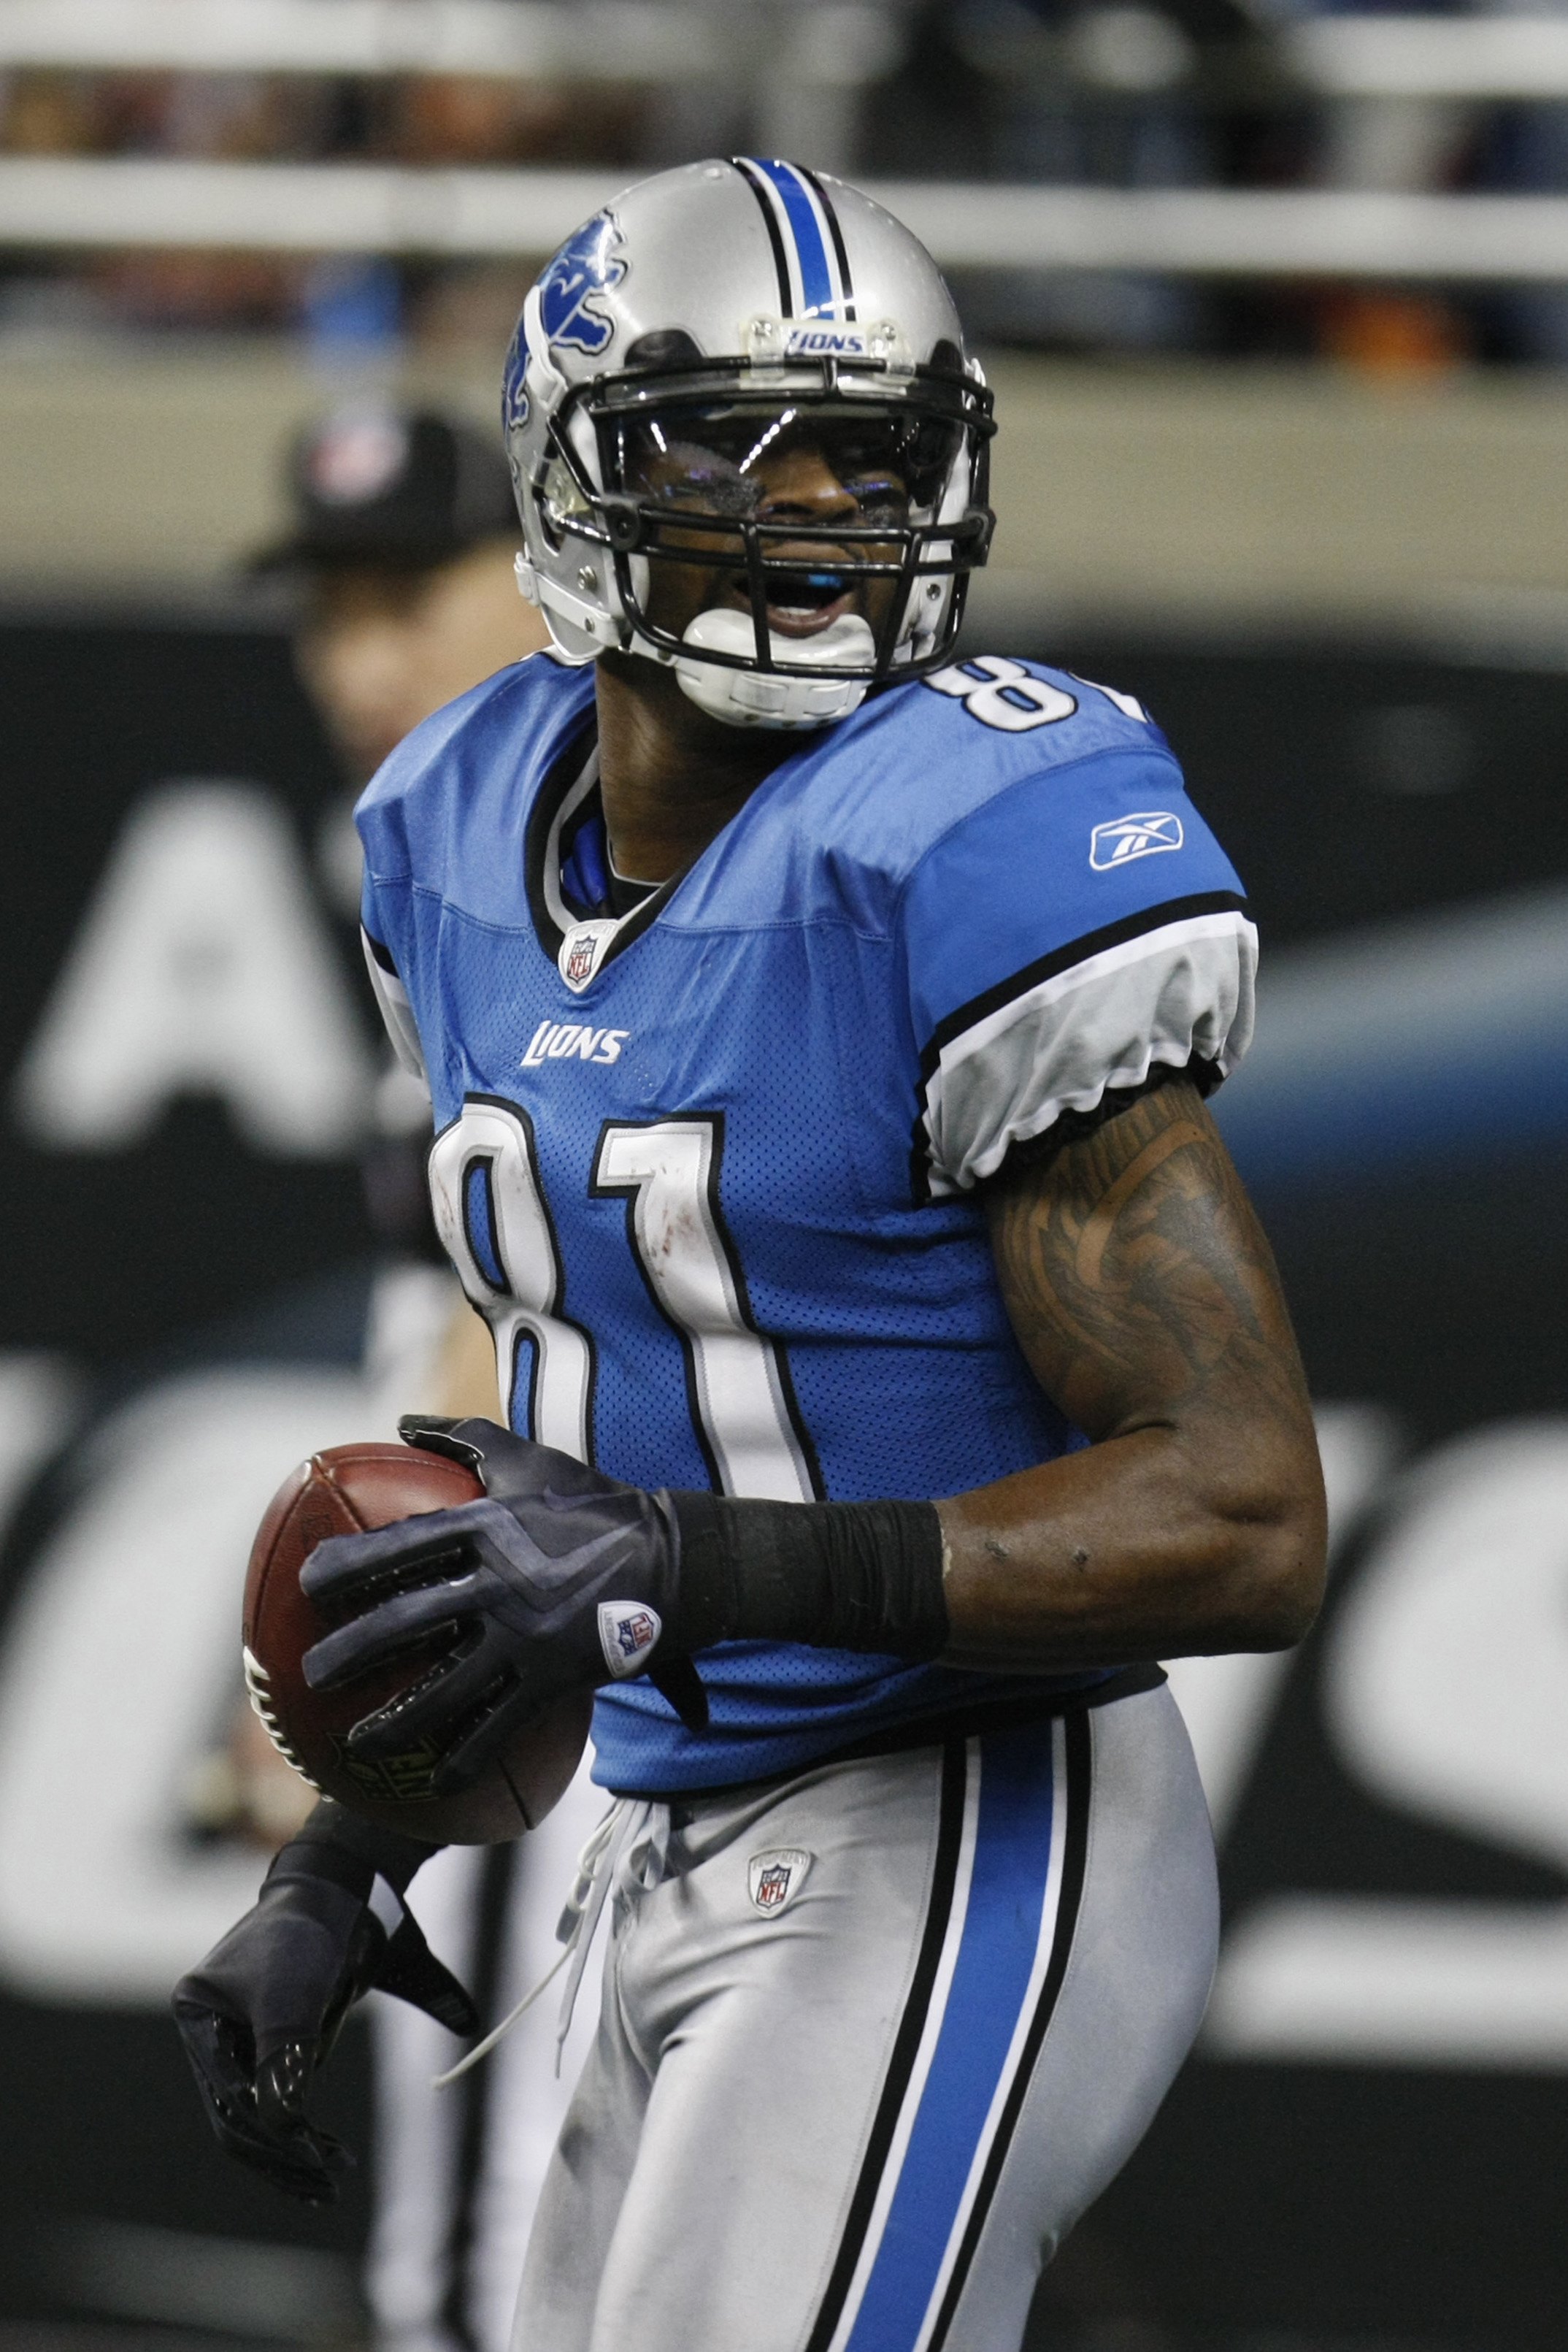 DETROIT - JANUARY 3:  Calvin Johnson #81 of the Detroit Lions looks on during the game against the Chicago Bears on January 3, 2010 at Ford Field in Detroit, Michigan. (Photo by Gregory Shamus/Getty Images)